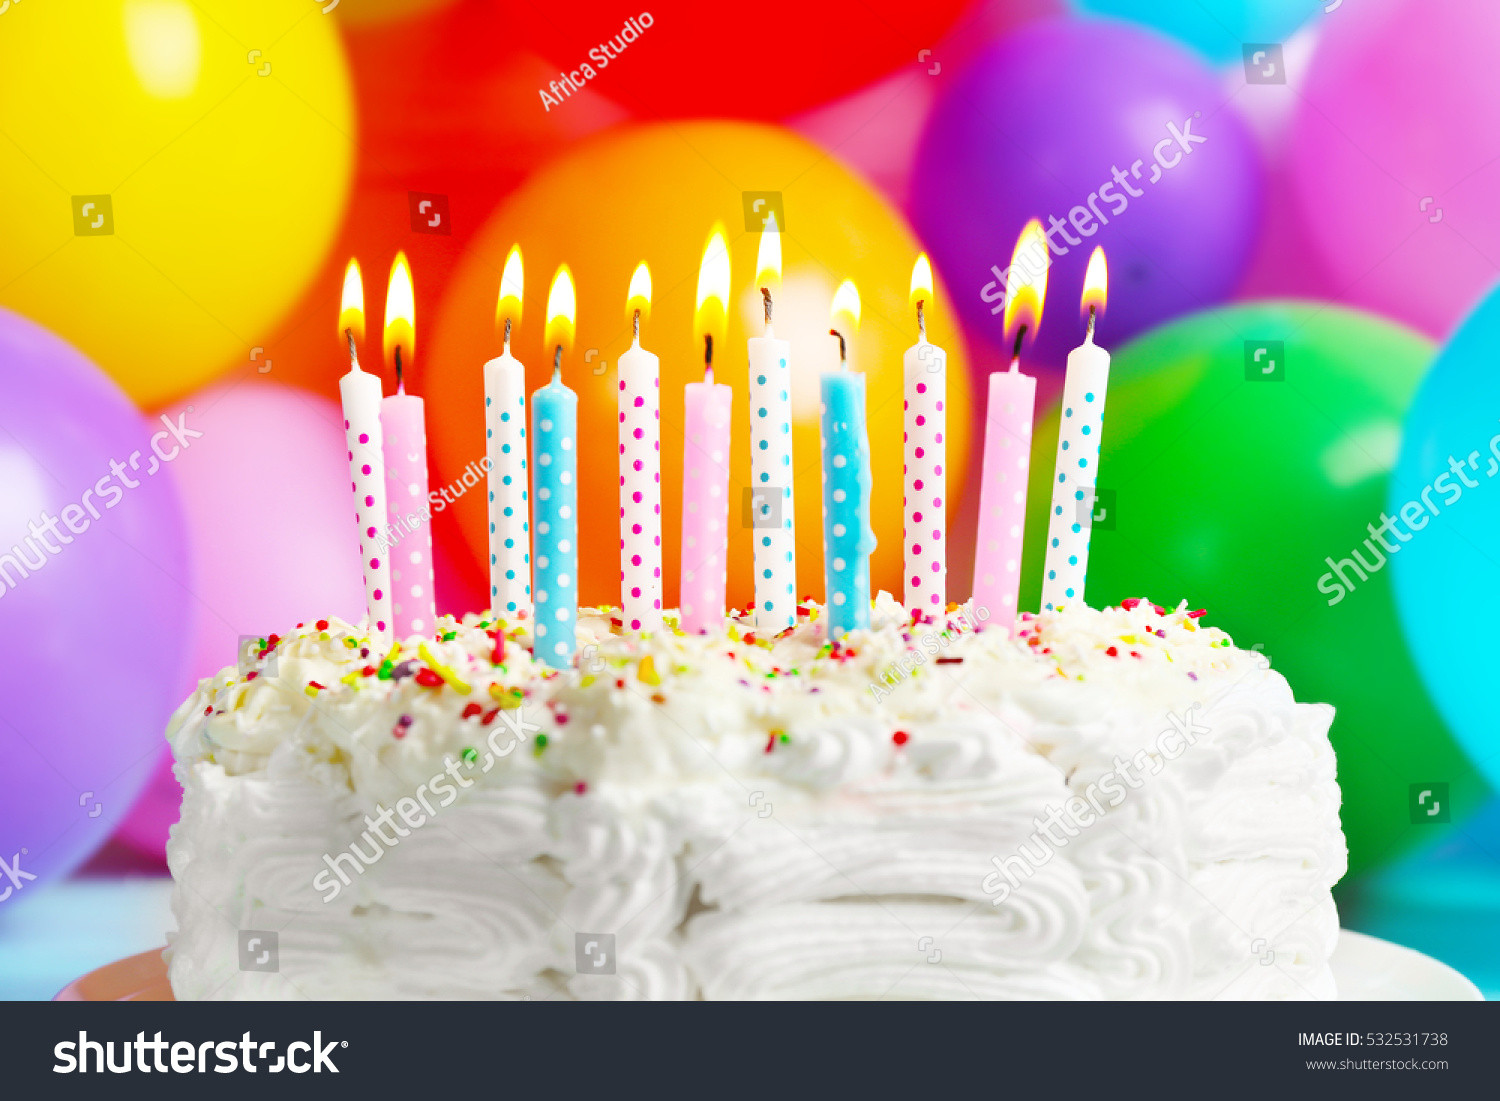 Birthday Cake With Candles And Balloons
 Birthday Cake Candles Balloons Background Stock